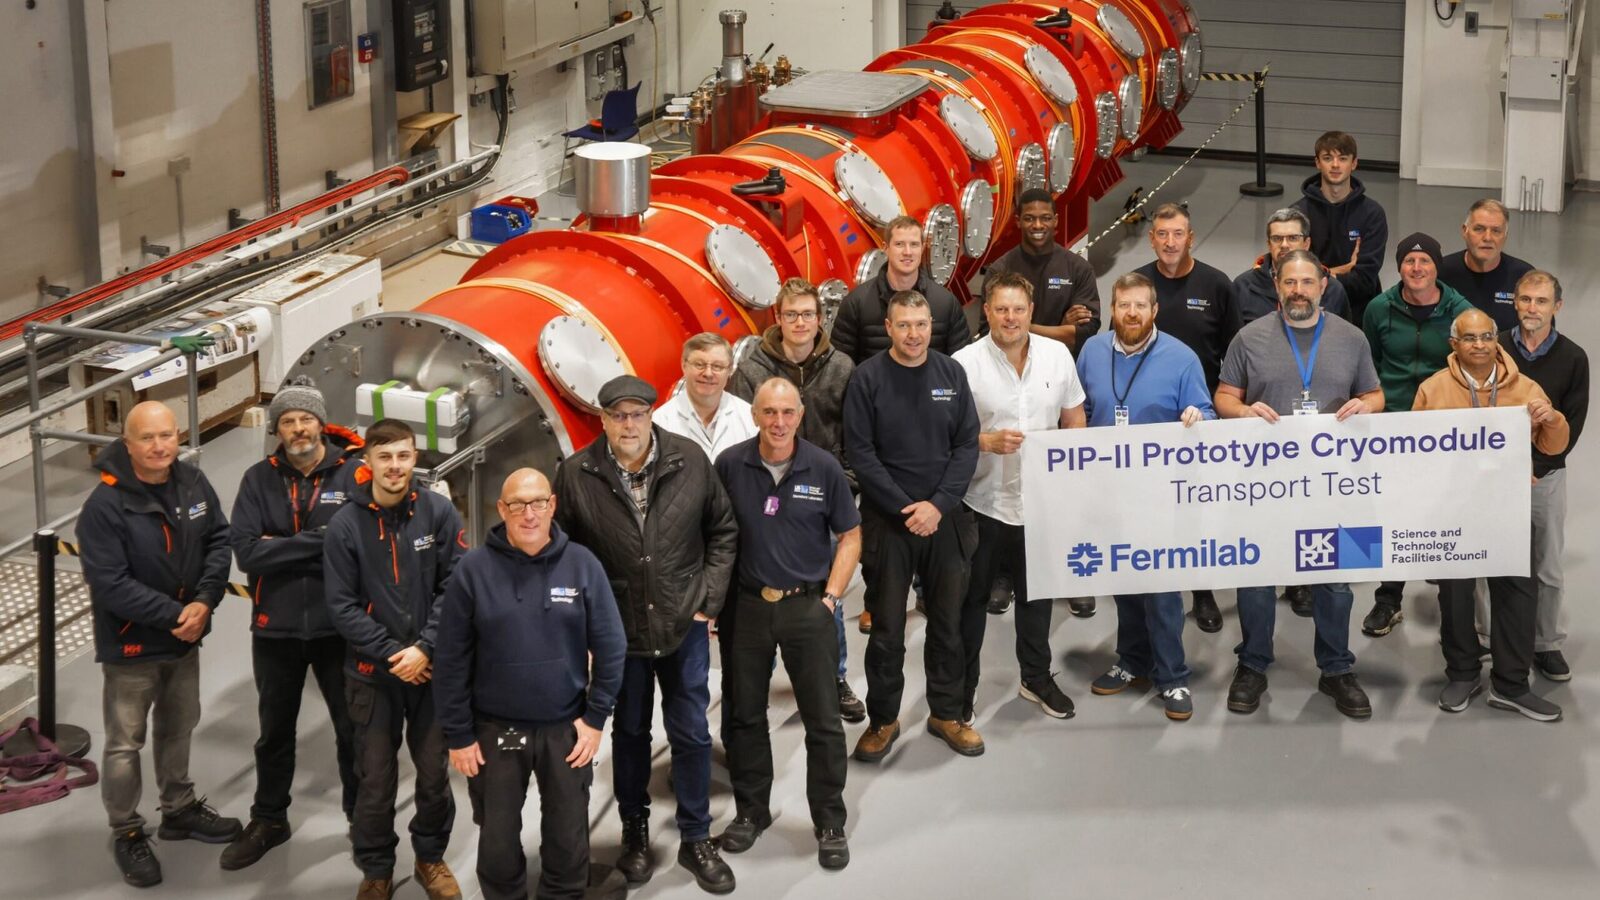 Members of the PIP-II team from Fermilab and STFC UKRI stand in front of the prototype HB650 cryomodule at Daresbury Laboratory